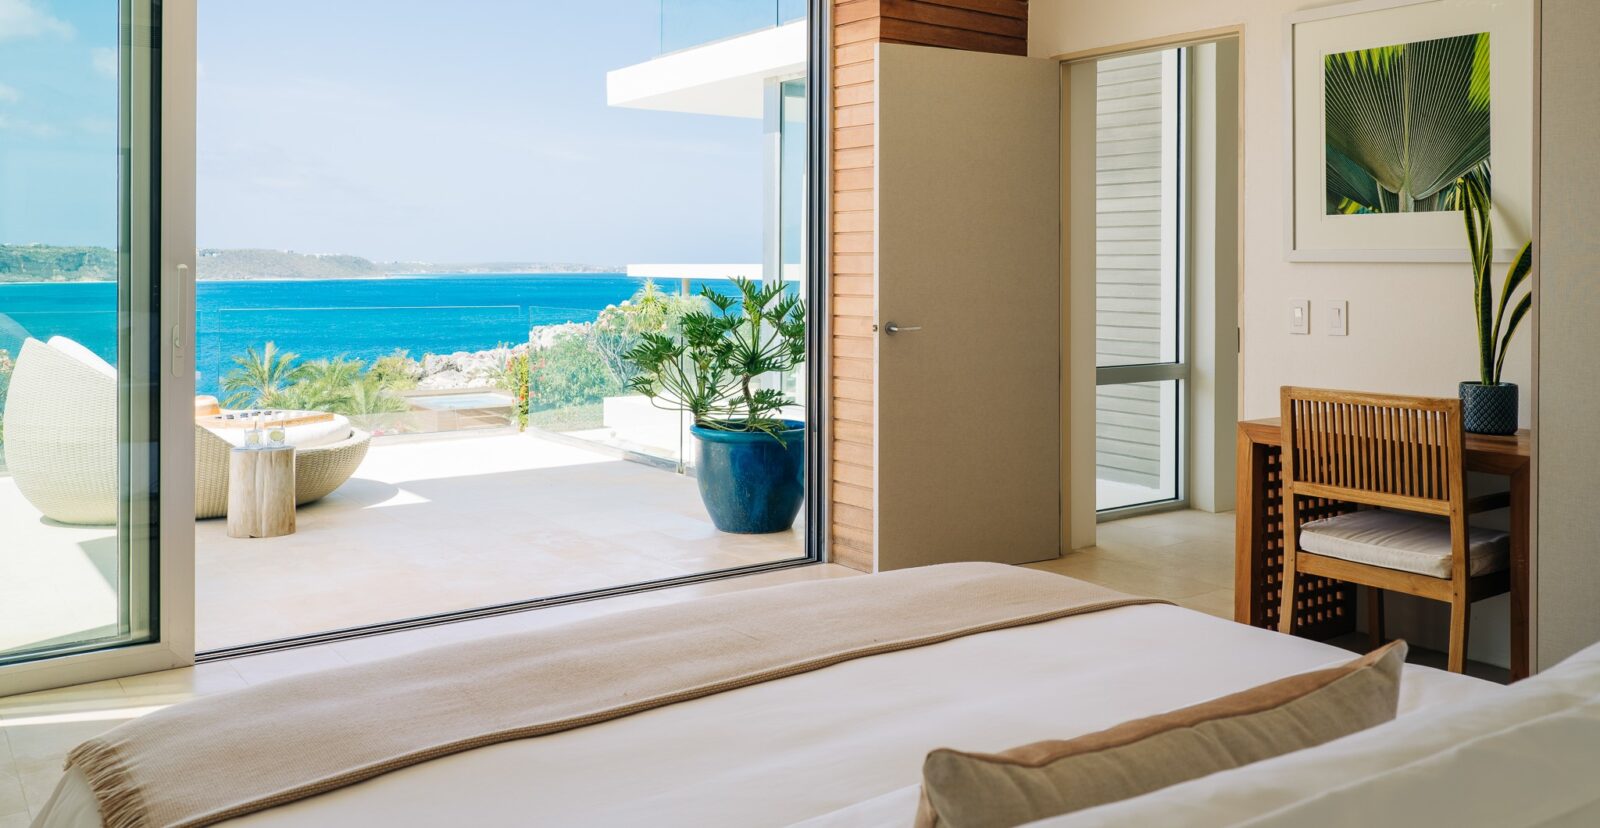 ANI Anguilla – Accommodation – Ocean View Guestroom